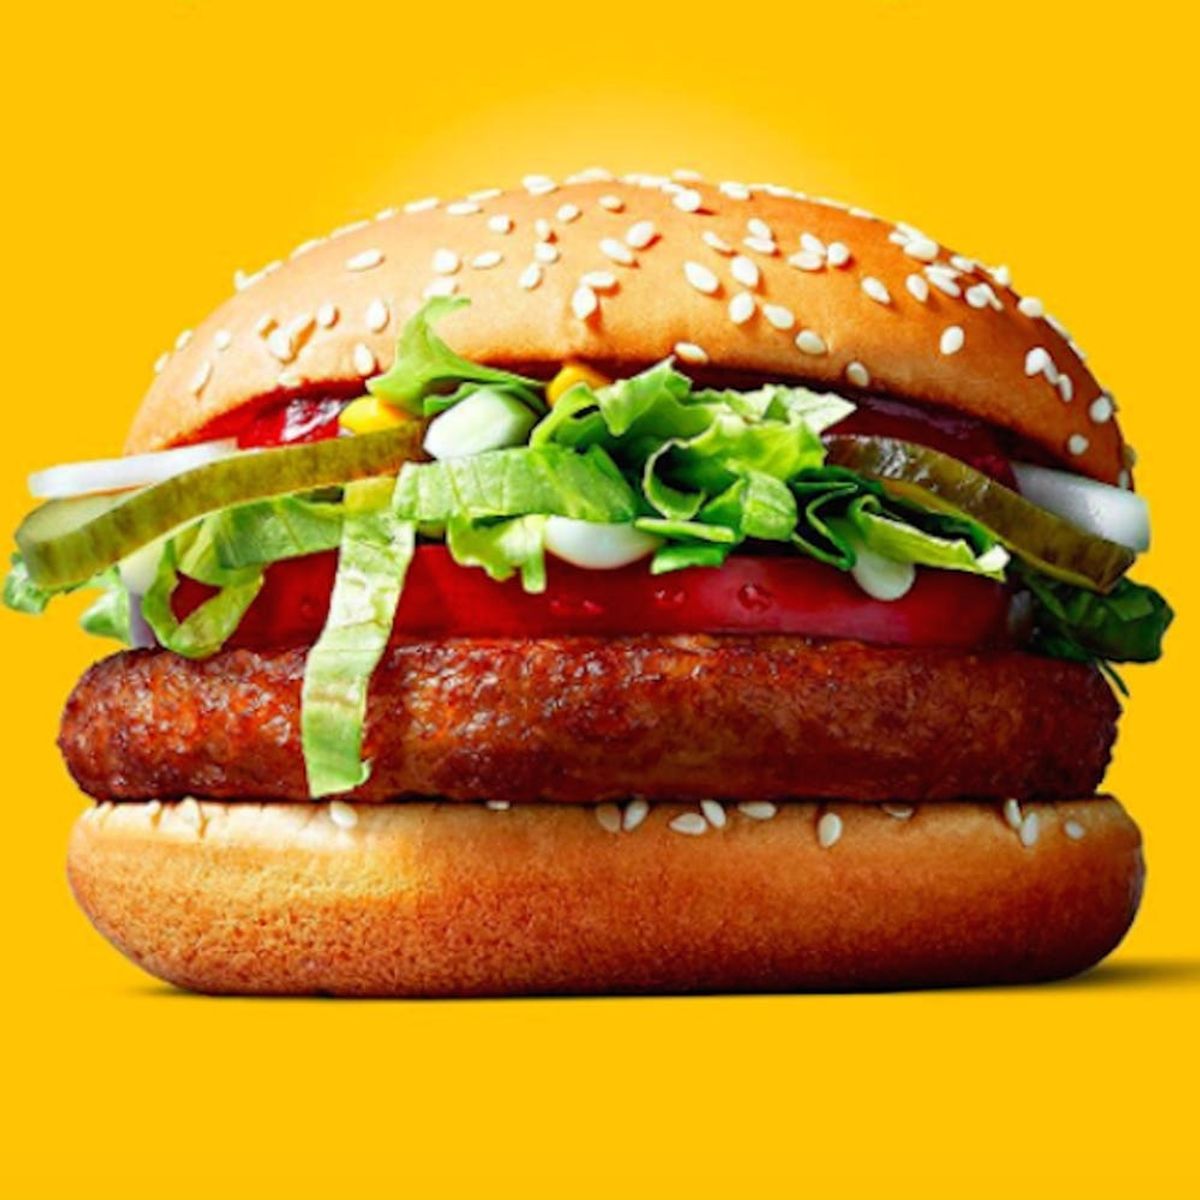 McDonald’s Introduced a Vegan Sandwich in Finland and OMG